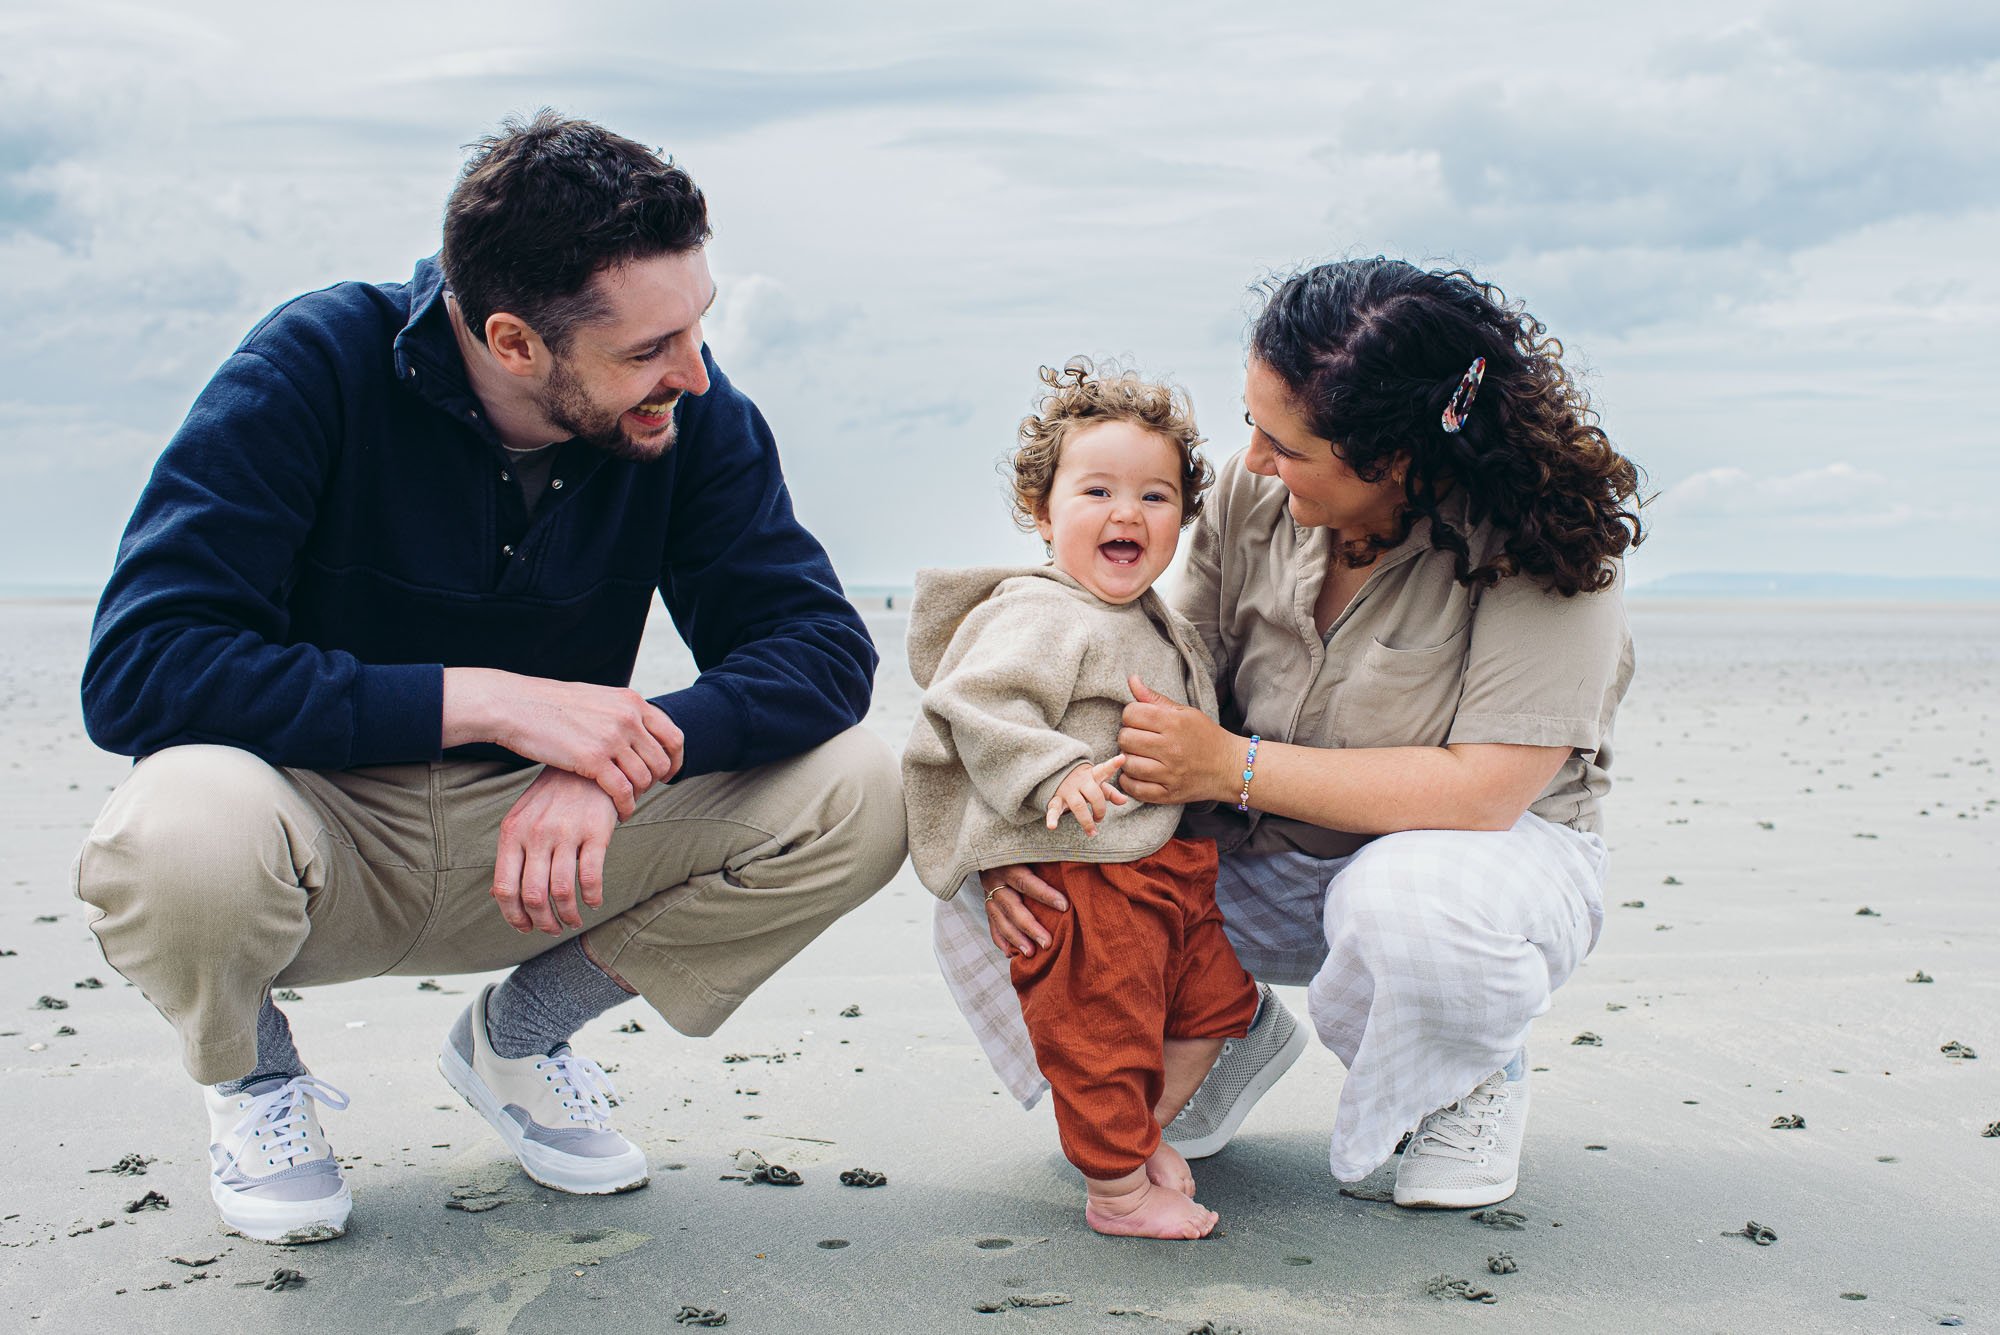 west-wittering-family-photographer-beach-photoshoot-candid-unposed-lifestyle-natural-family-portraits-sussex.jpg